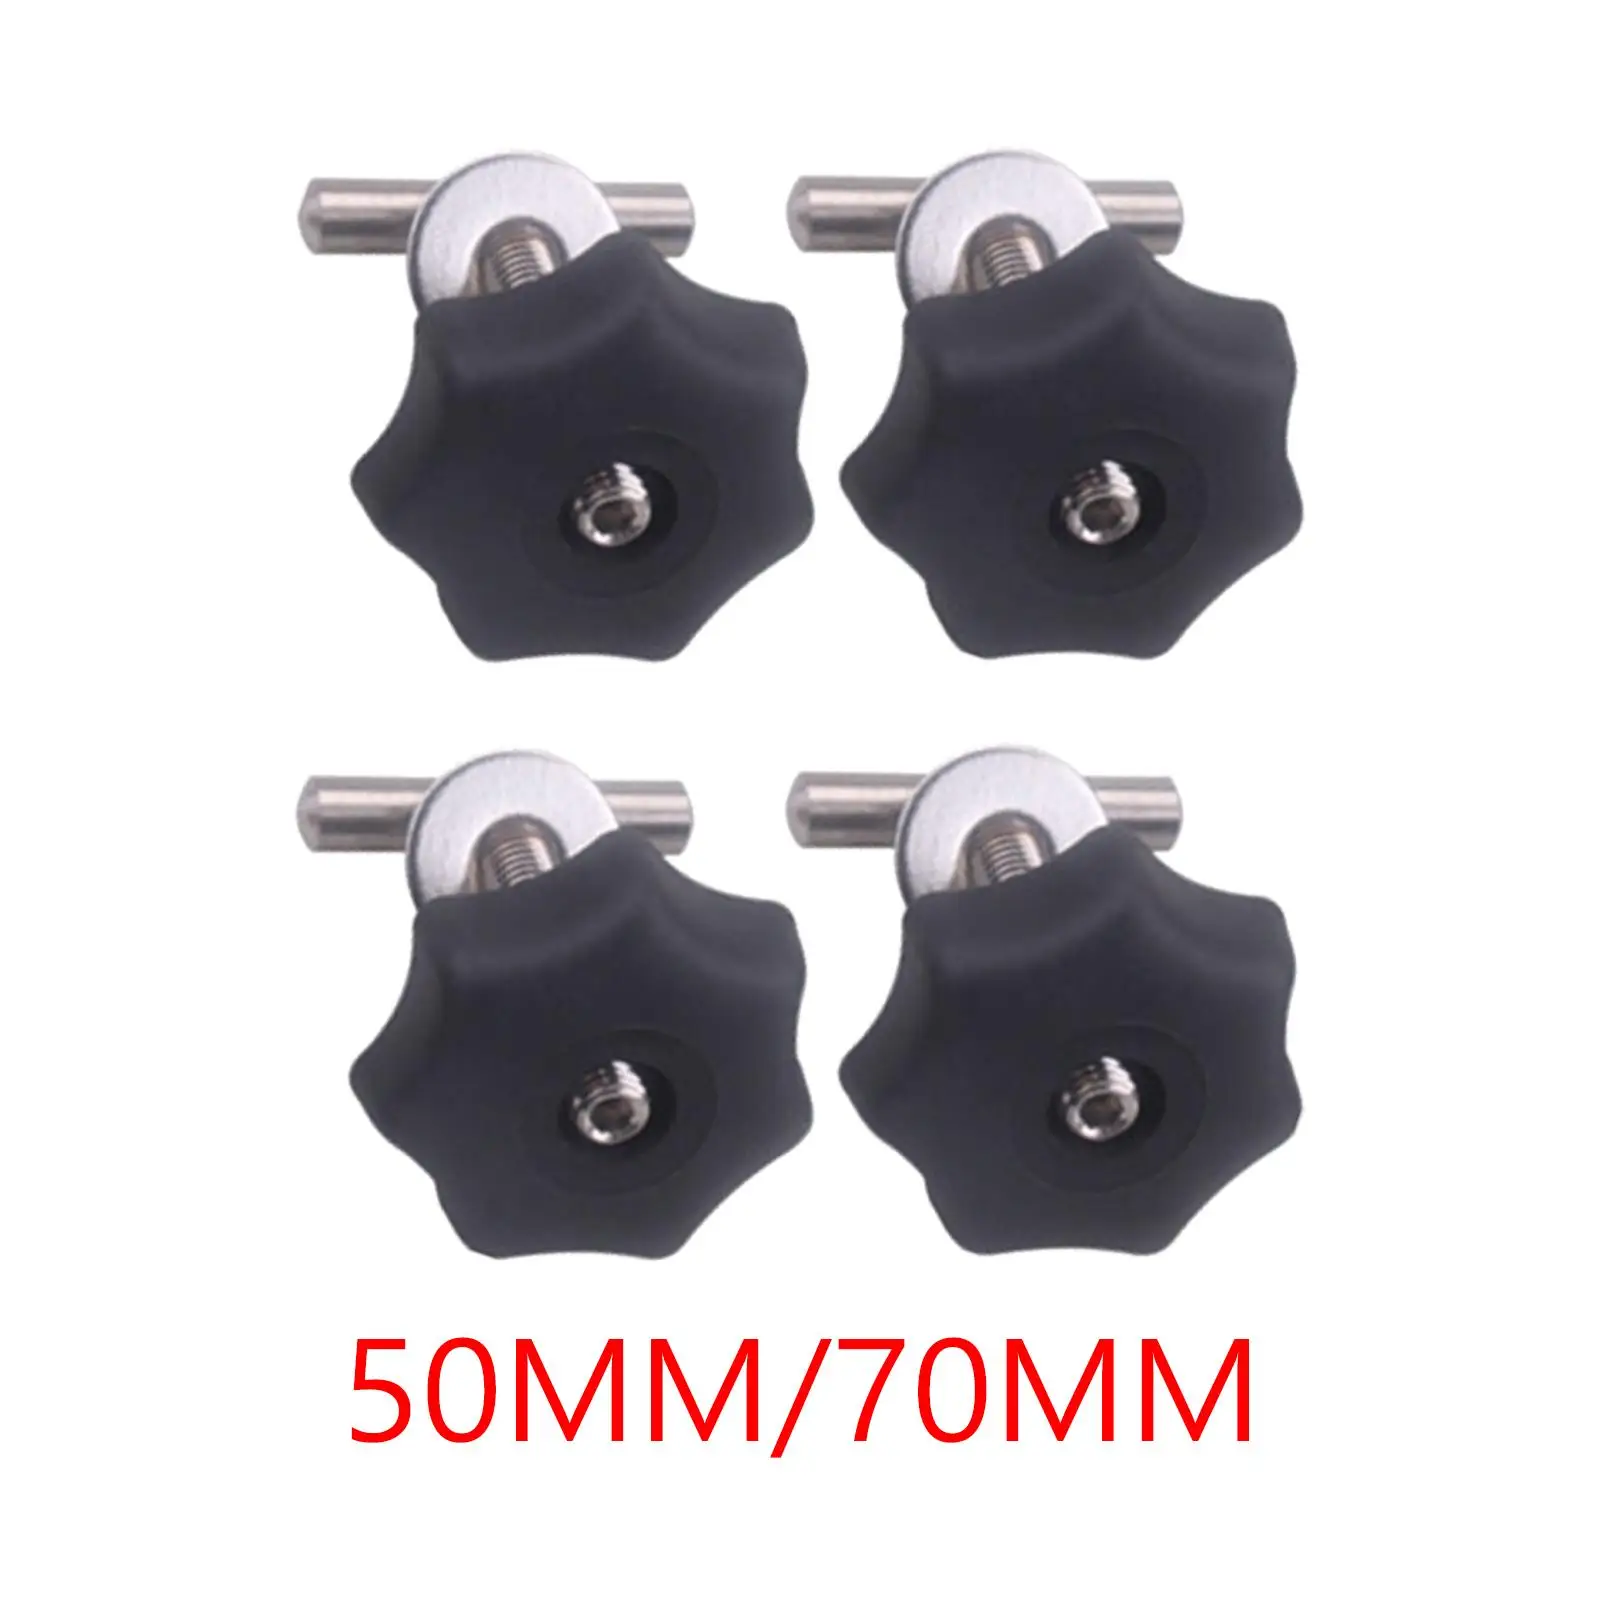 

4Pcs Locking Rail Screws Bolt Set Mounting Accessories Stainless Steel Stable Fixing Screws set for vw T5 Multiflexboard